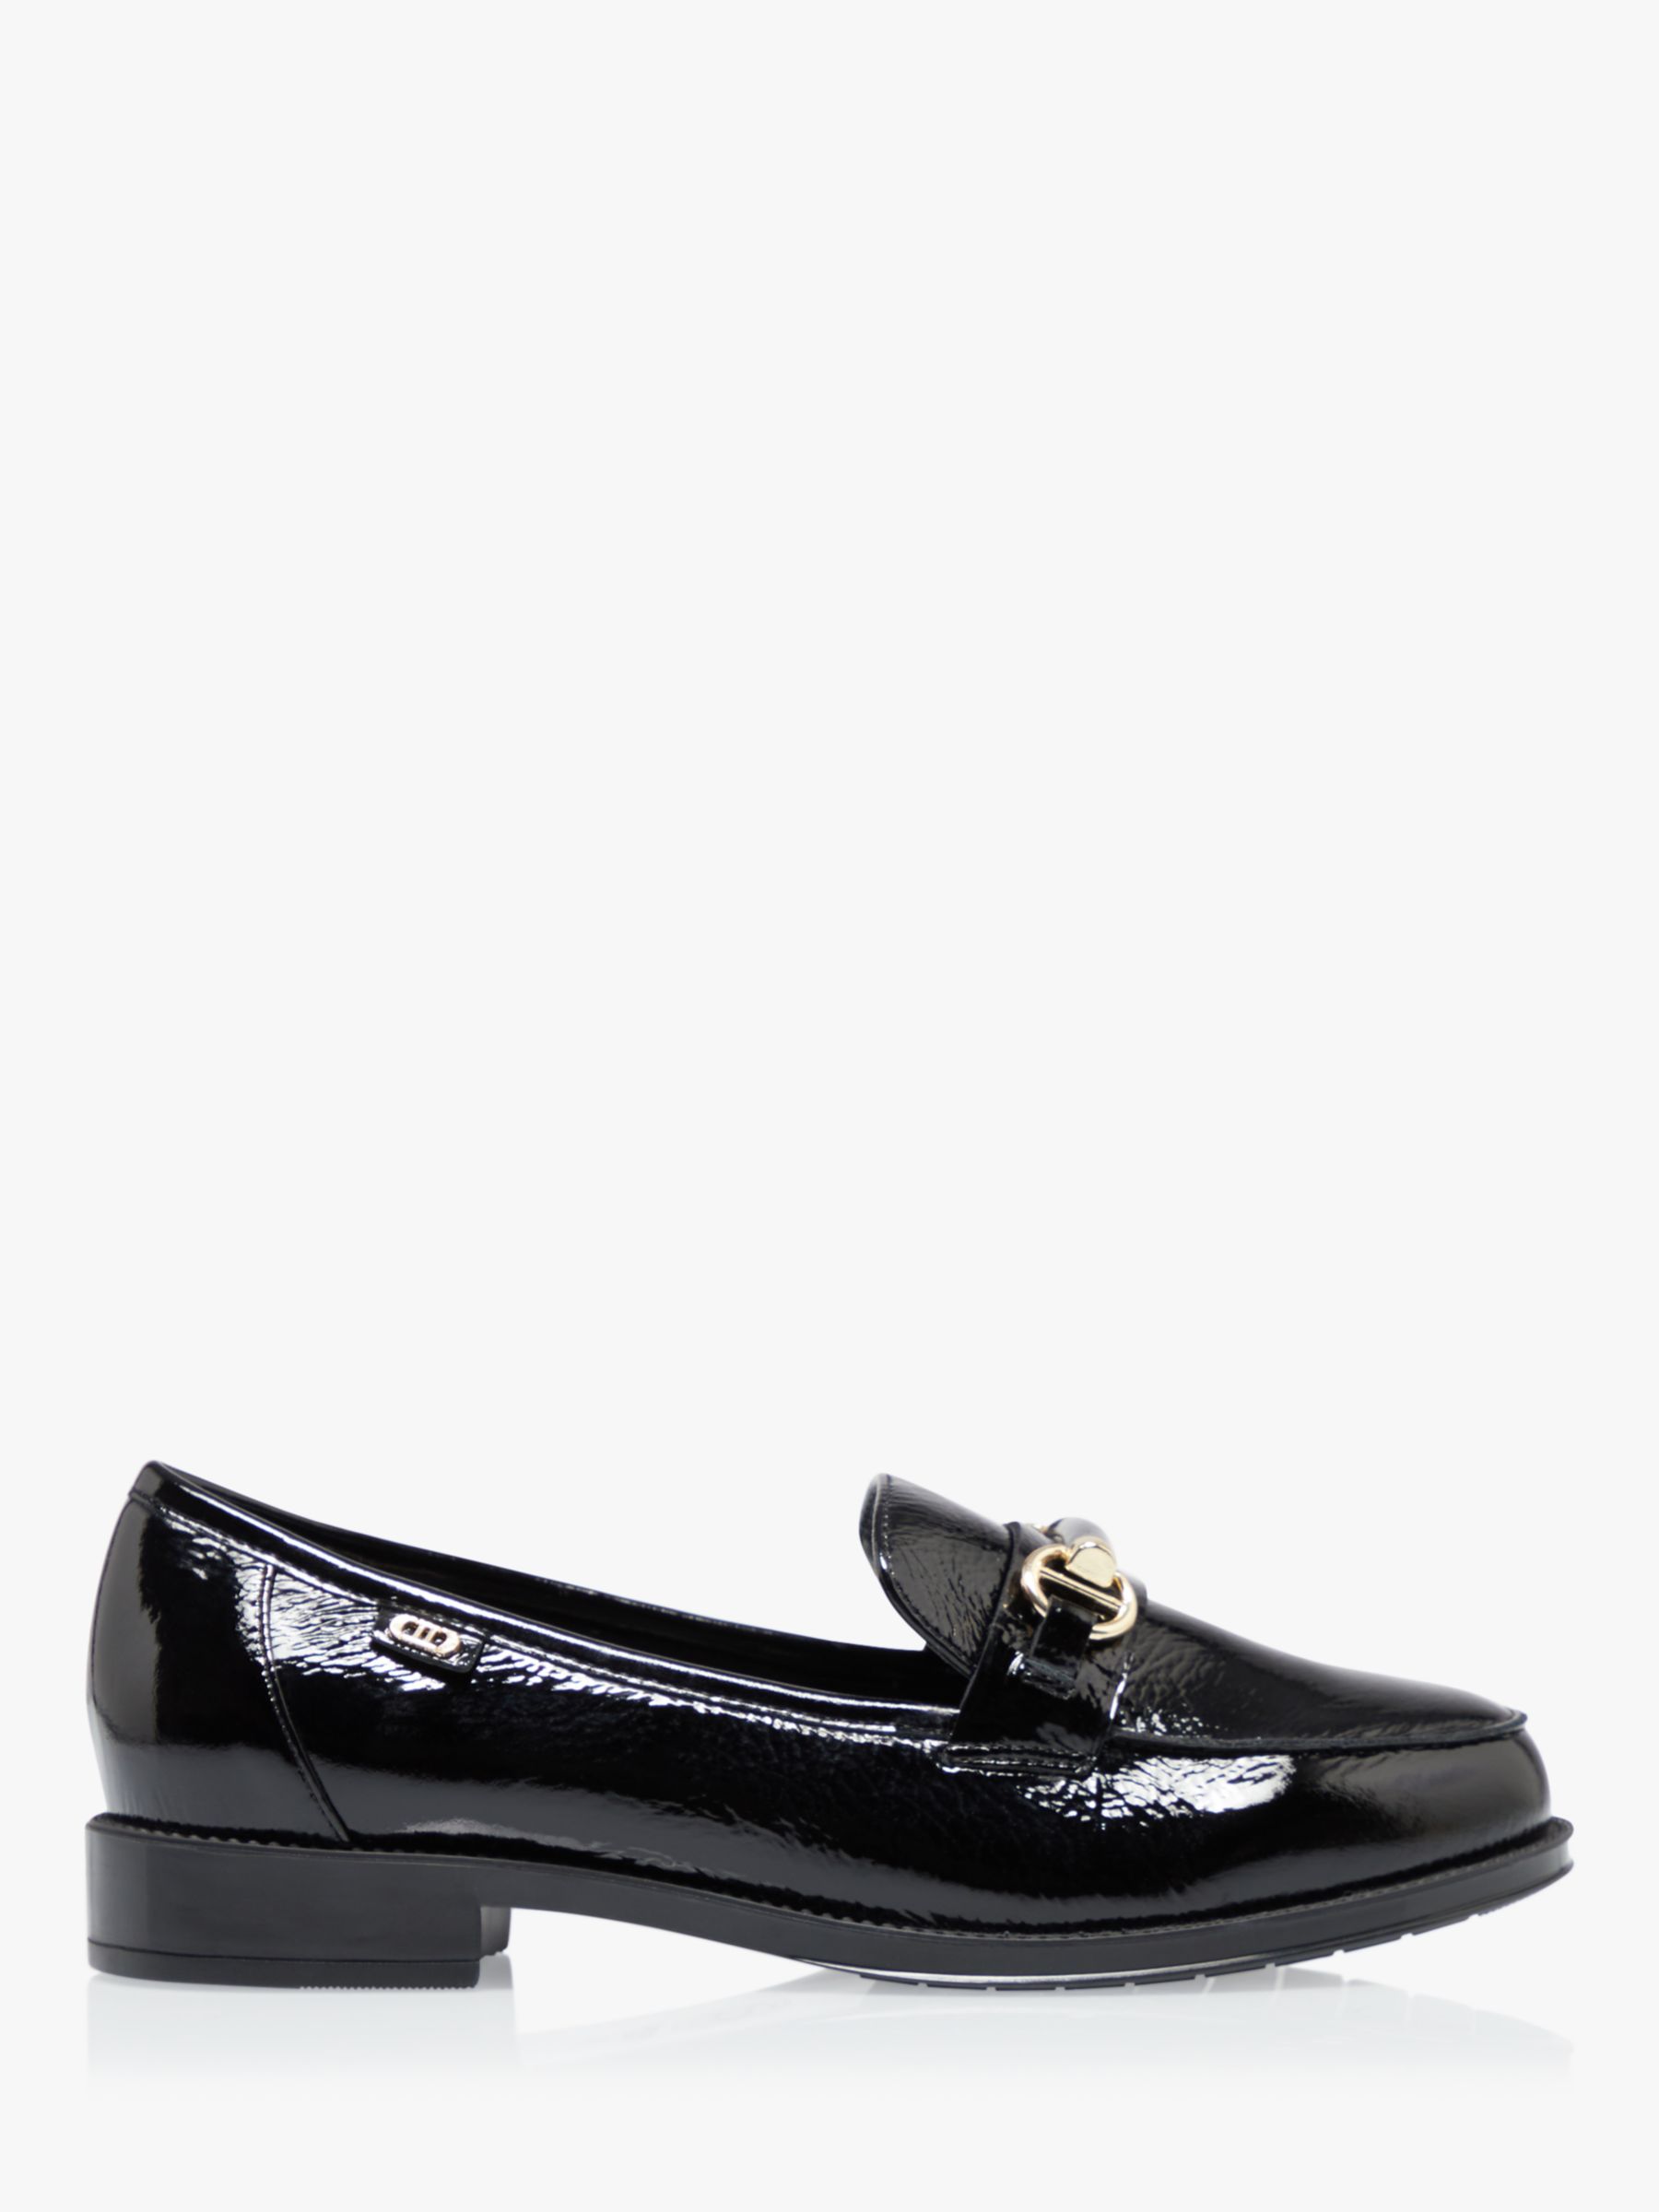 Dune Wide Fit Guys Leather Loafers, Black at John Lewis & Partners